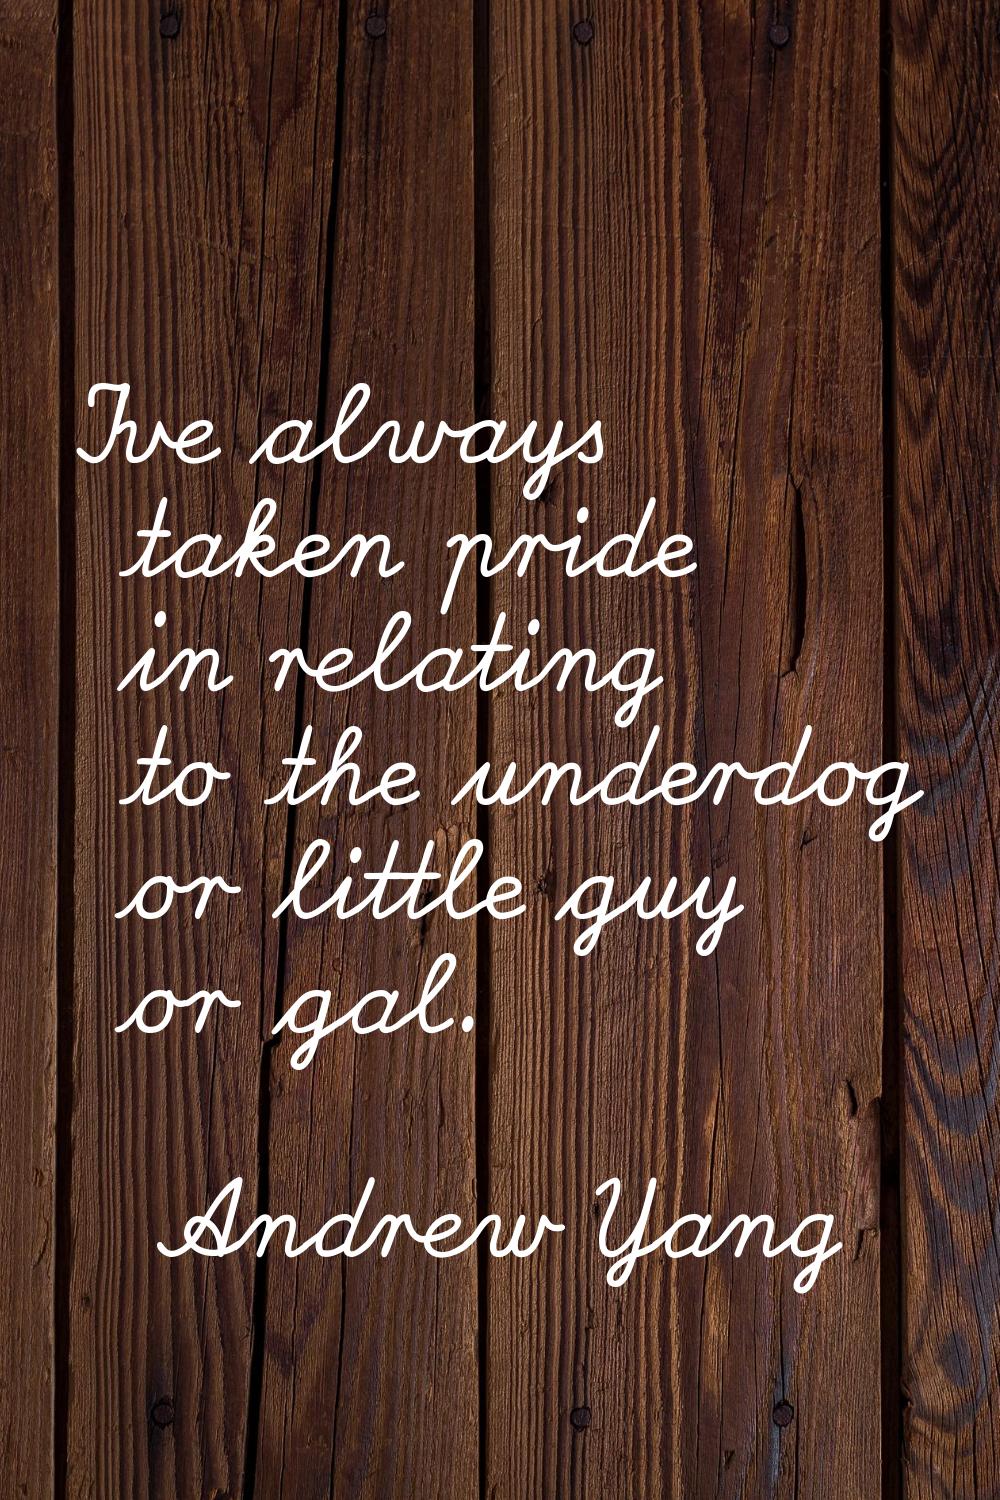 I've always taken pride in relating to the underdog or little guy or gal.